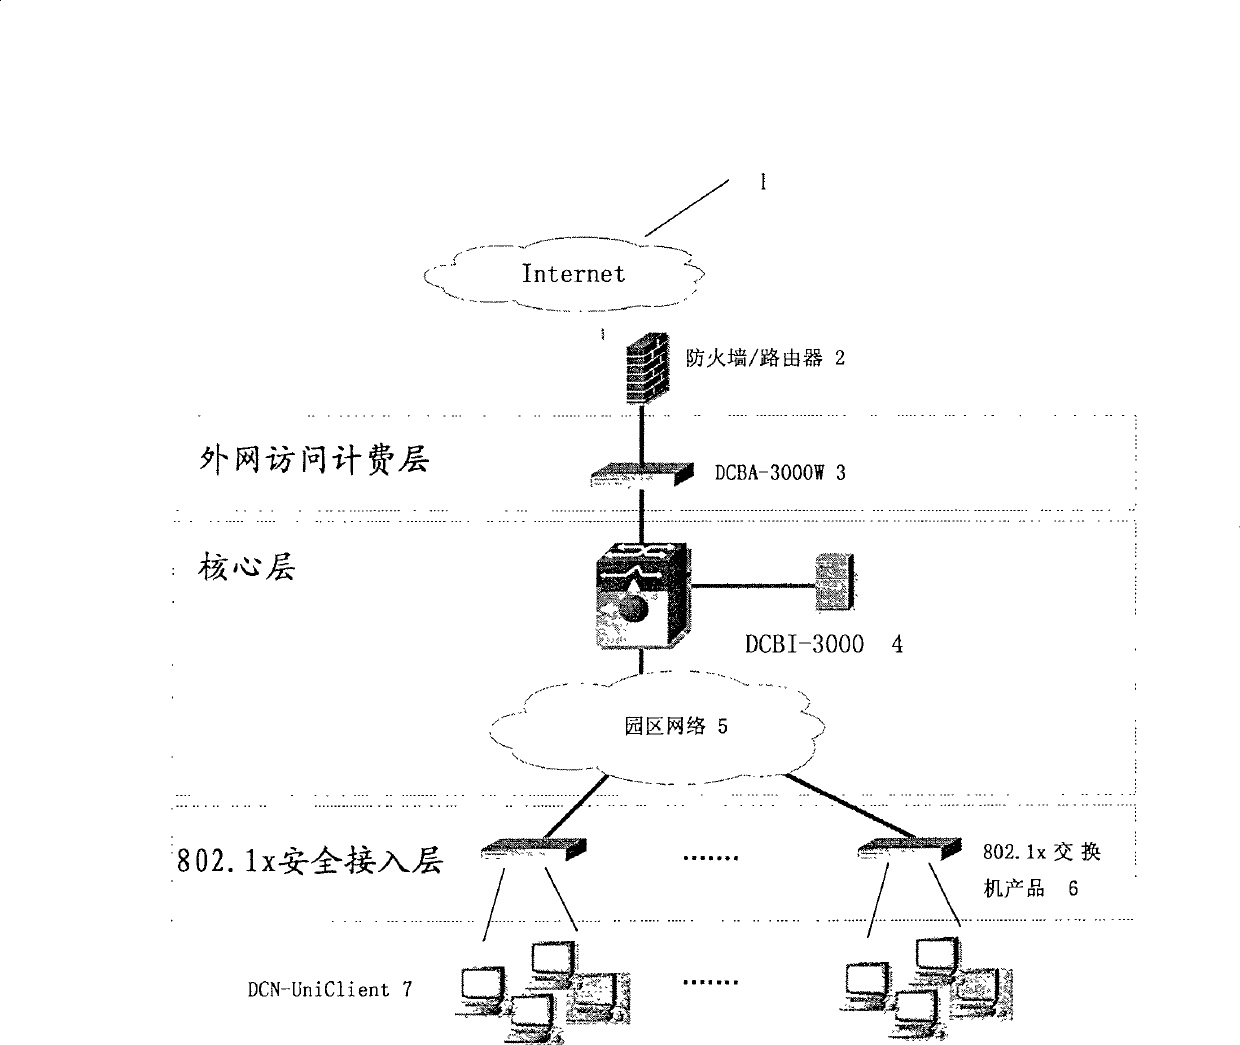 System and method for certification and charge of network